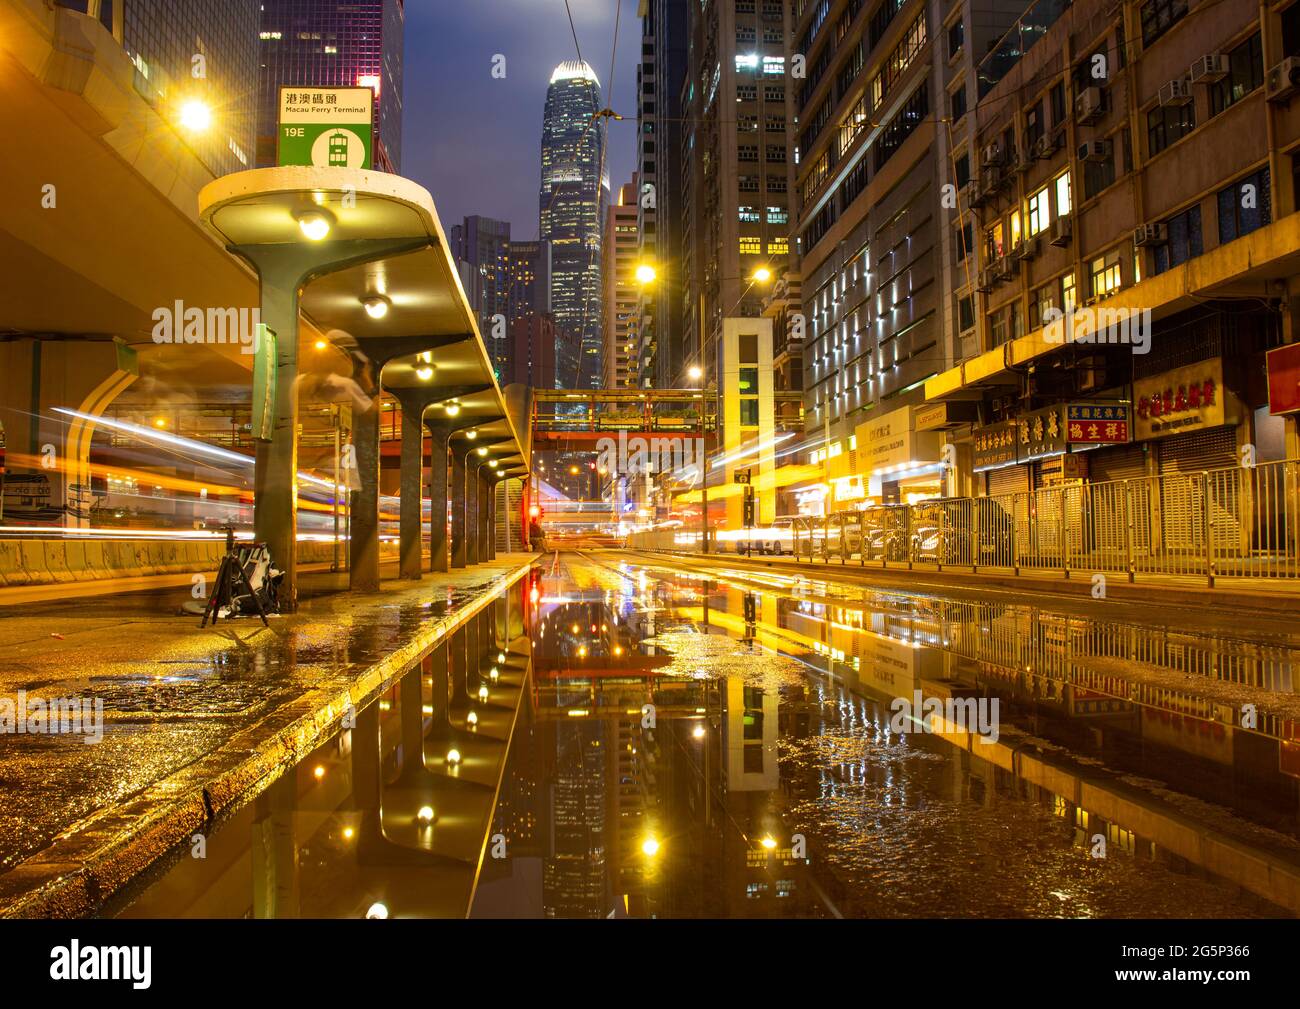 Beautiful colours and reflections at a tram stop in Hong Kong after a storm.  Long exposure at night gave light streaks from buses and trams. Stock Photo